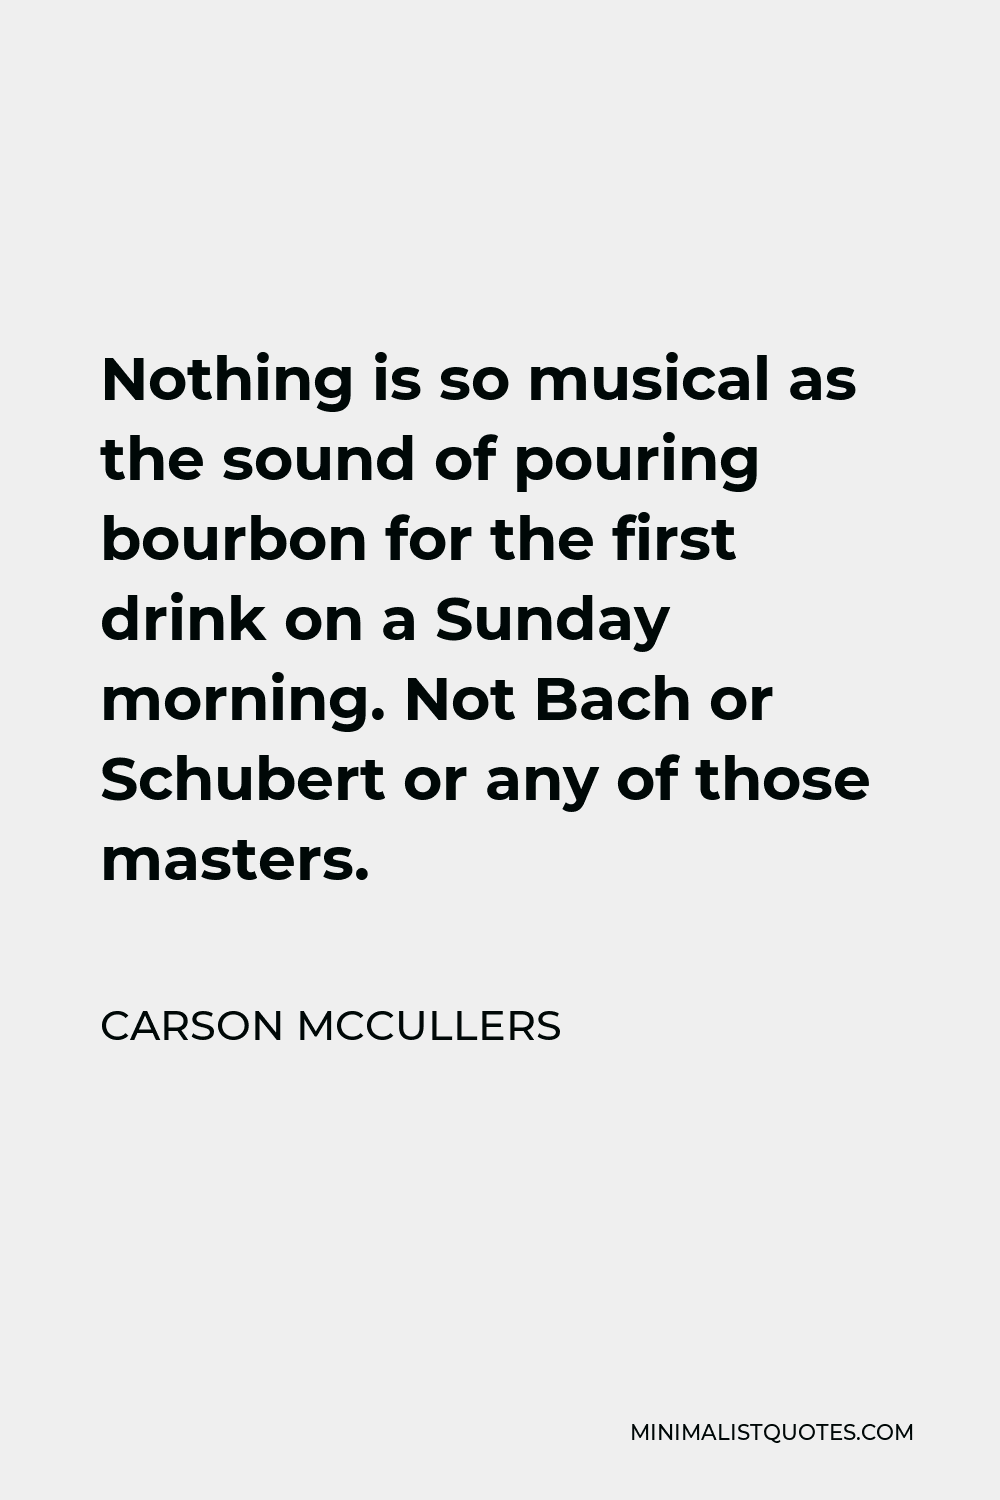 Carson McCullers Quote - Nothing is so musical as the sound of pouring bourbon for the first drink on a Sunday morning. Not Bach or Schubert or any of those masters.